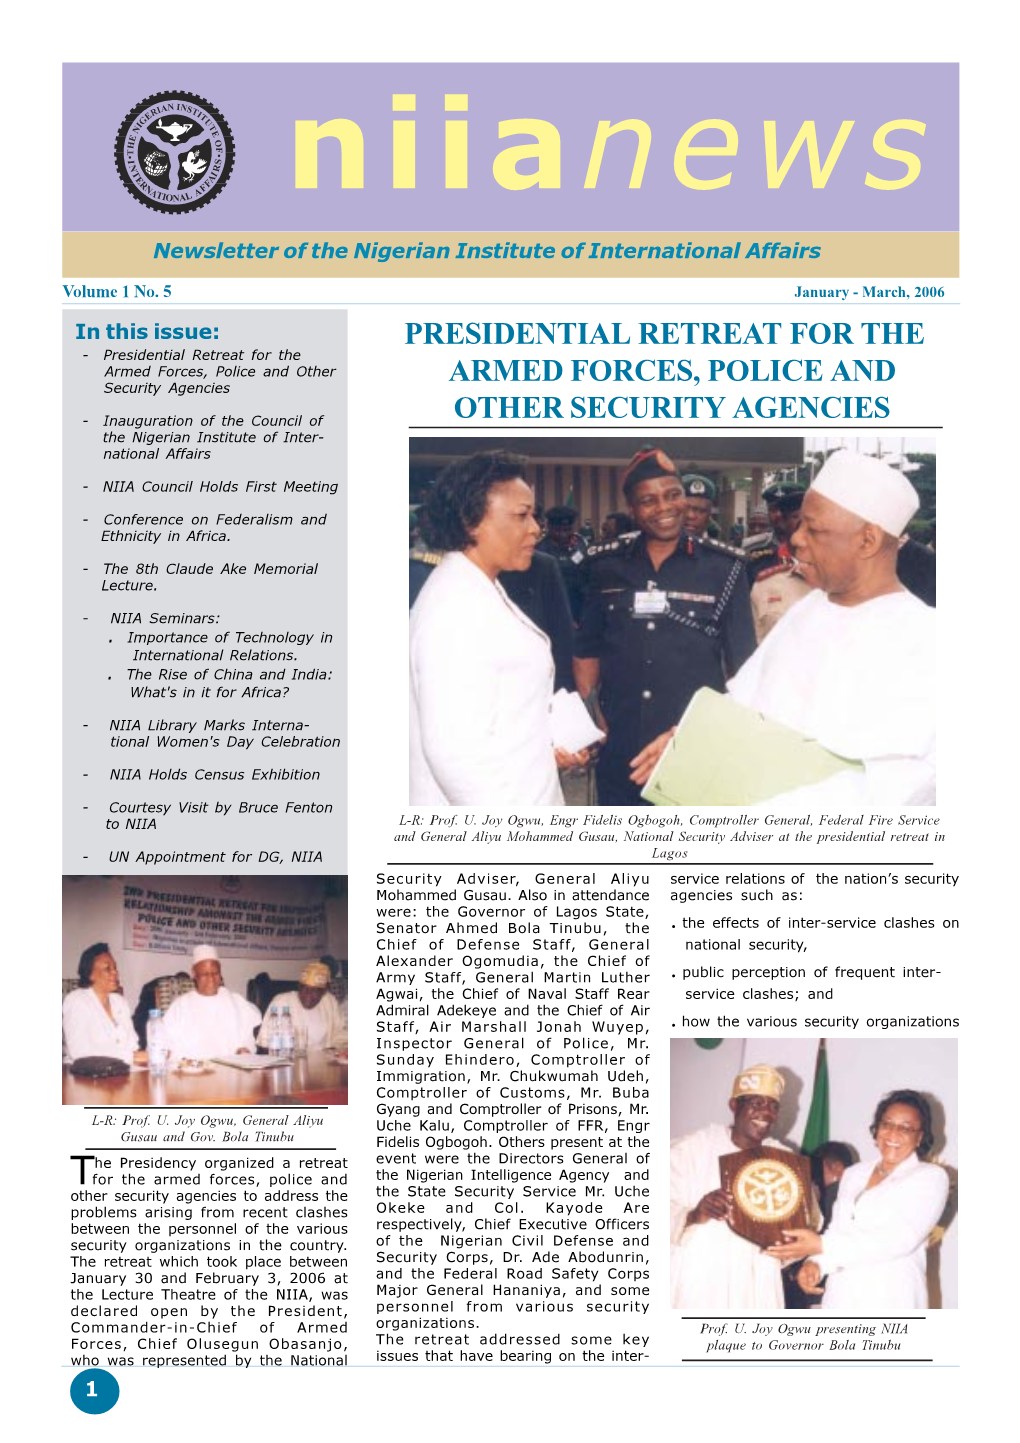 Presidential Retreat for the Armed Forces, Police and Other Security Agencies ARMED FORCES, POLICE AND